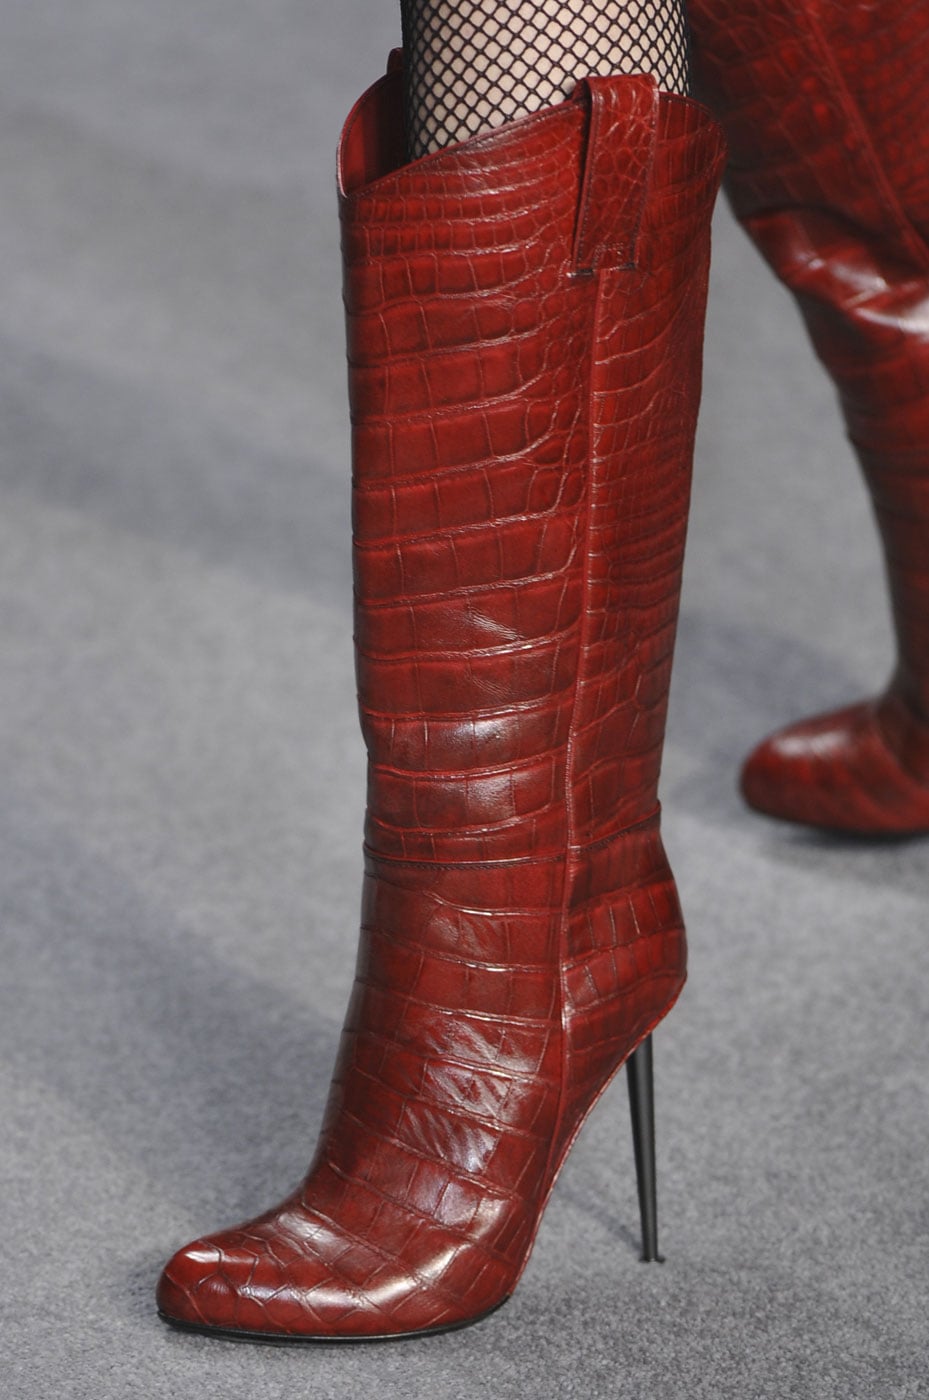 Tom Ford Fall 2014 | What Sort of Shoes Do they Love in London? | POPSUGAR  Fashion Photo 5